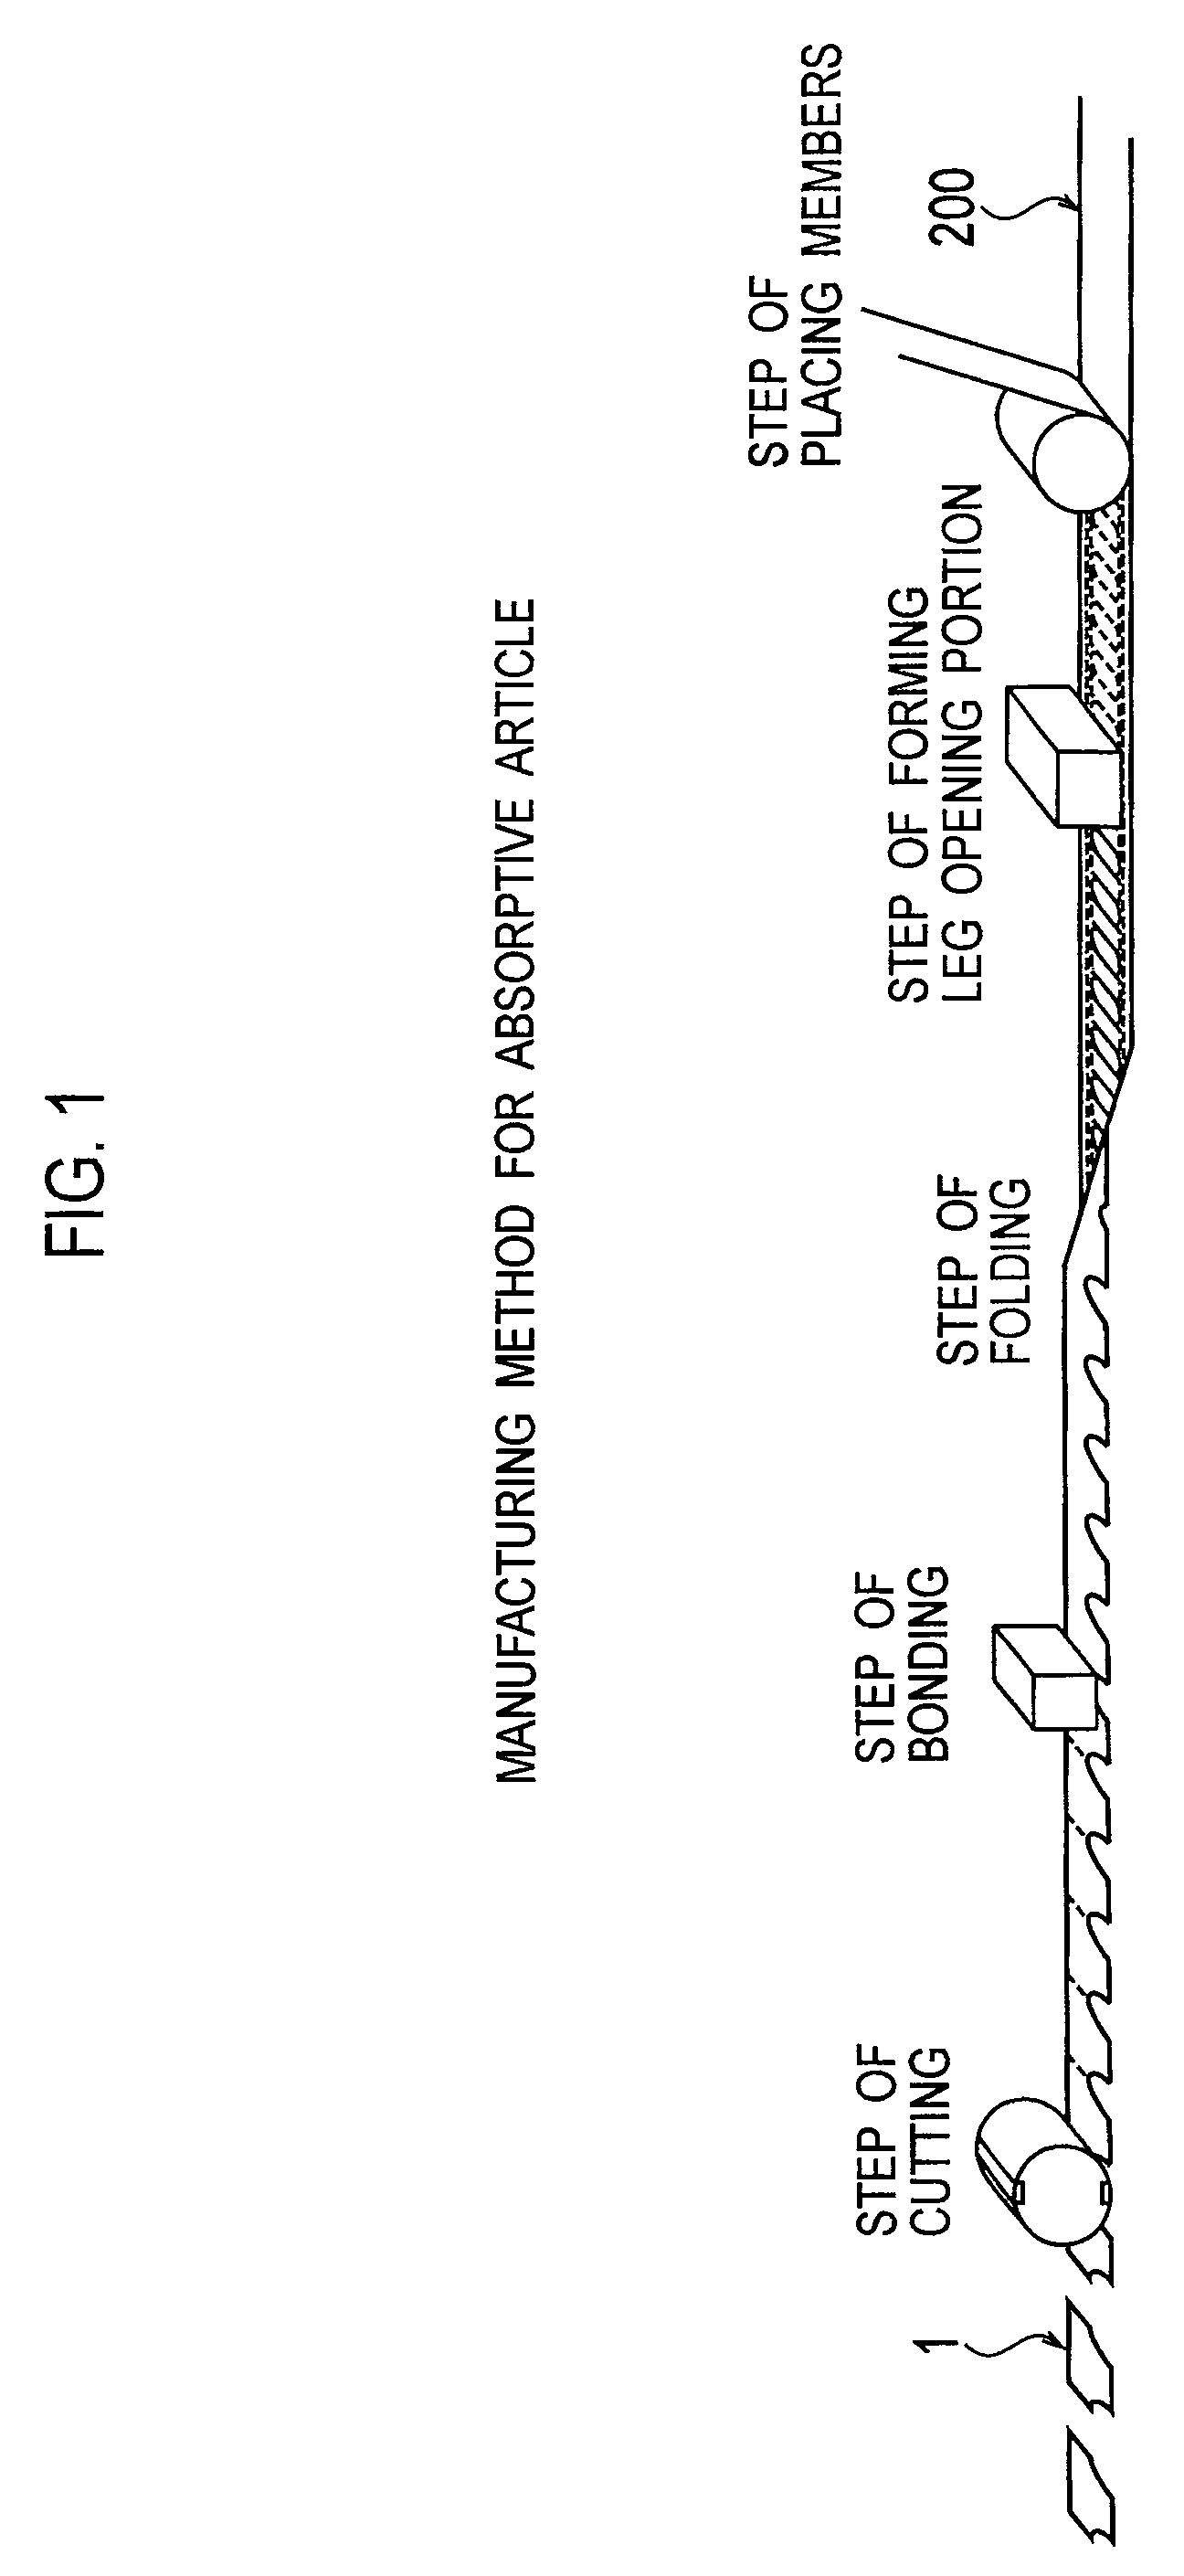 Cutting device and manufacturing method for absorptive article